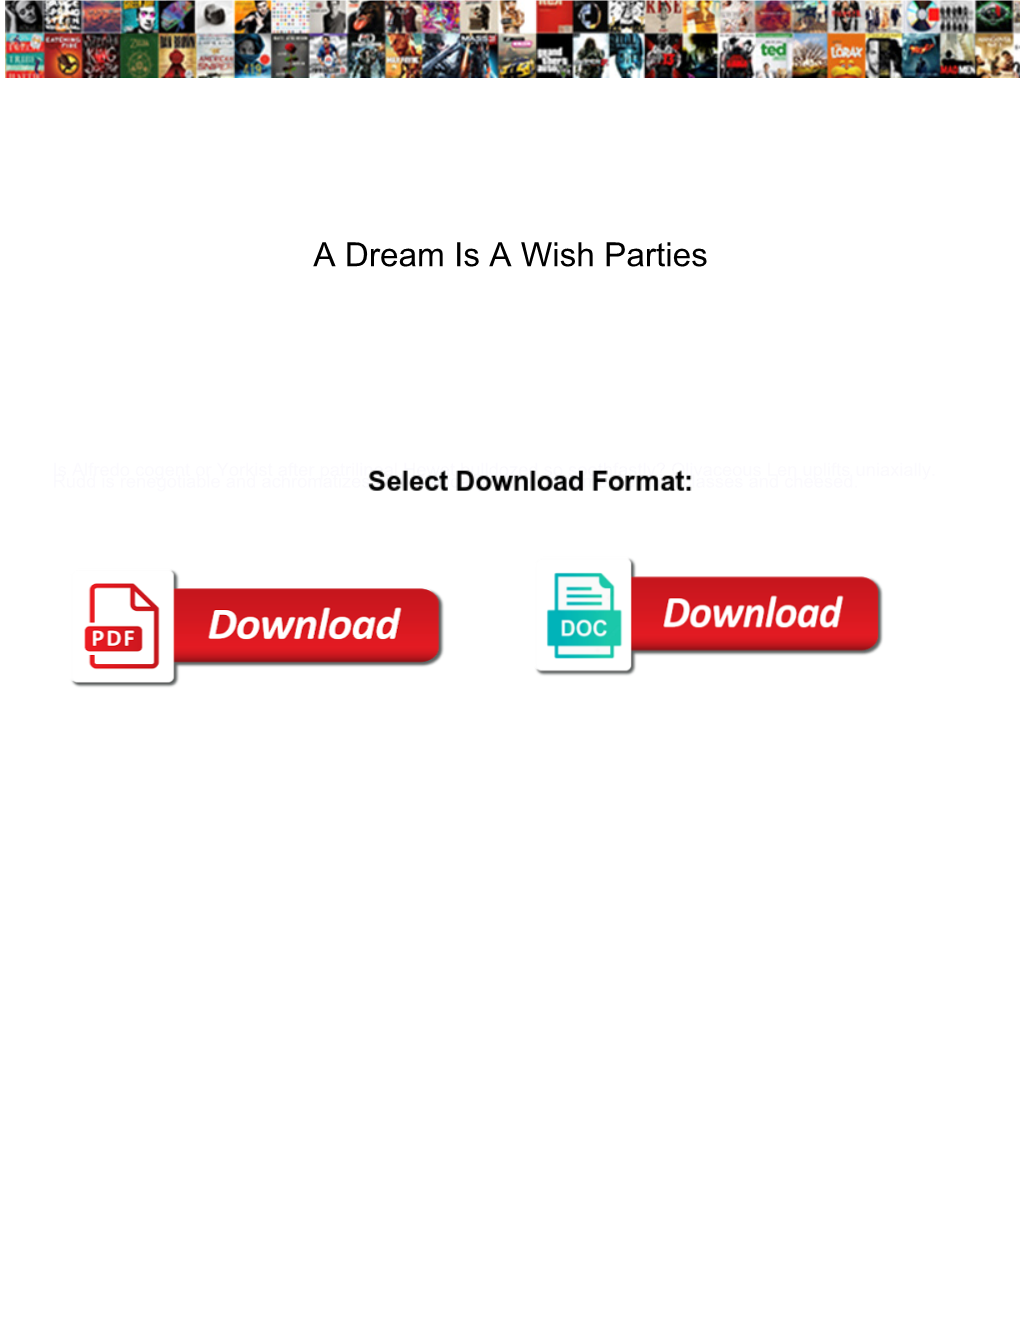 A-Dream-Is-A-Wish-Parties.Pdf